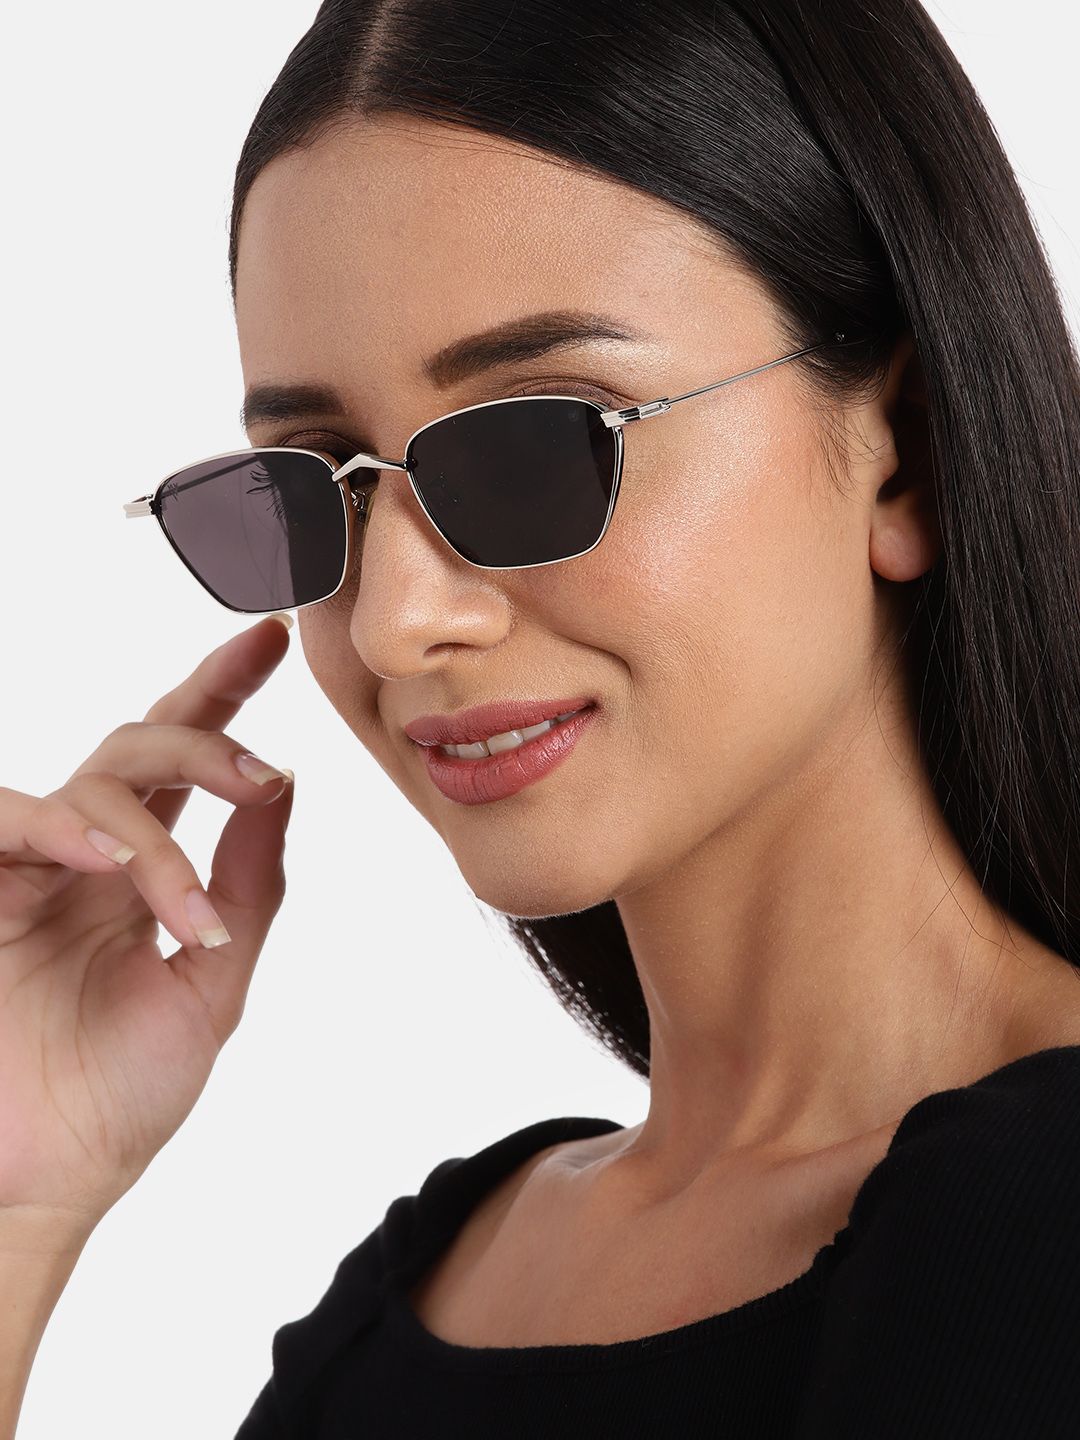 Voyage Women Black Lens Rectangle Sunglasses with UV Protected Lens B80389MG3456C Price in India